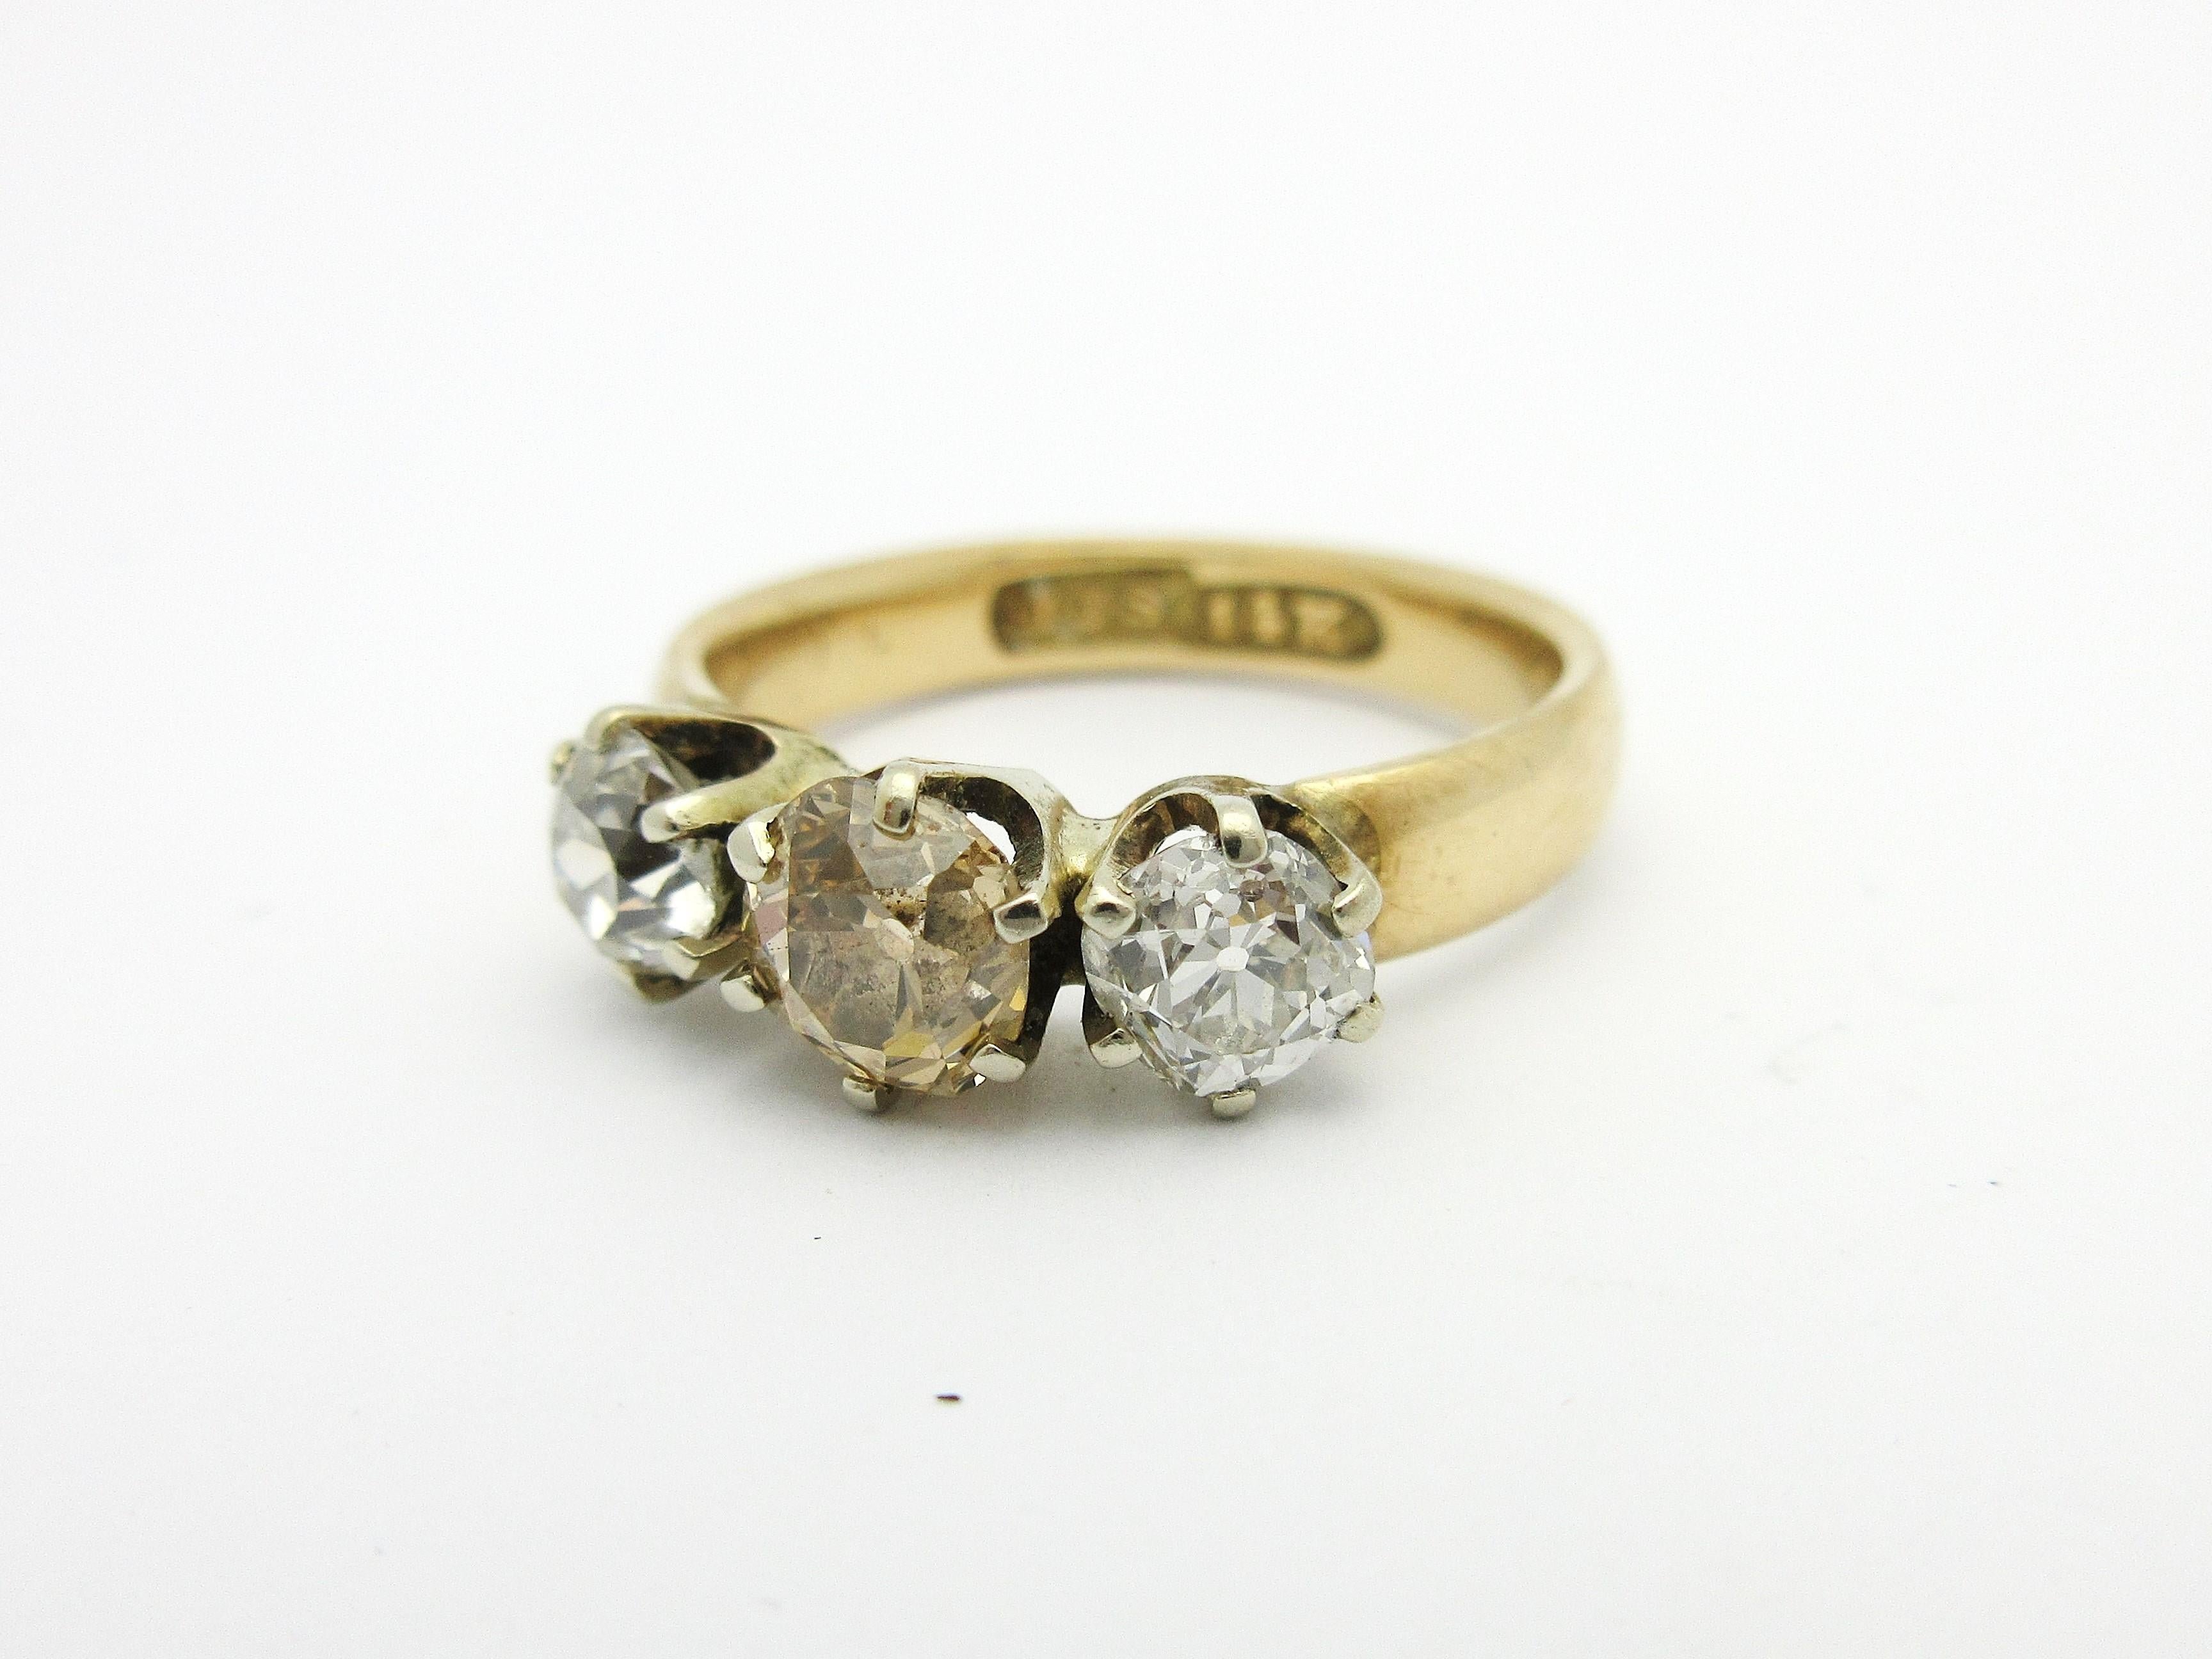 This incredible antique ring from the early 1900s was crafted by JJ Sommer Co. out of North Attleboro, Massachusetts.  

The ring contains three old mine cut diamonds in an antique 3-stone setting, each held by six white gold prongs.   The